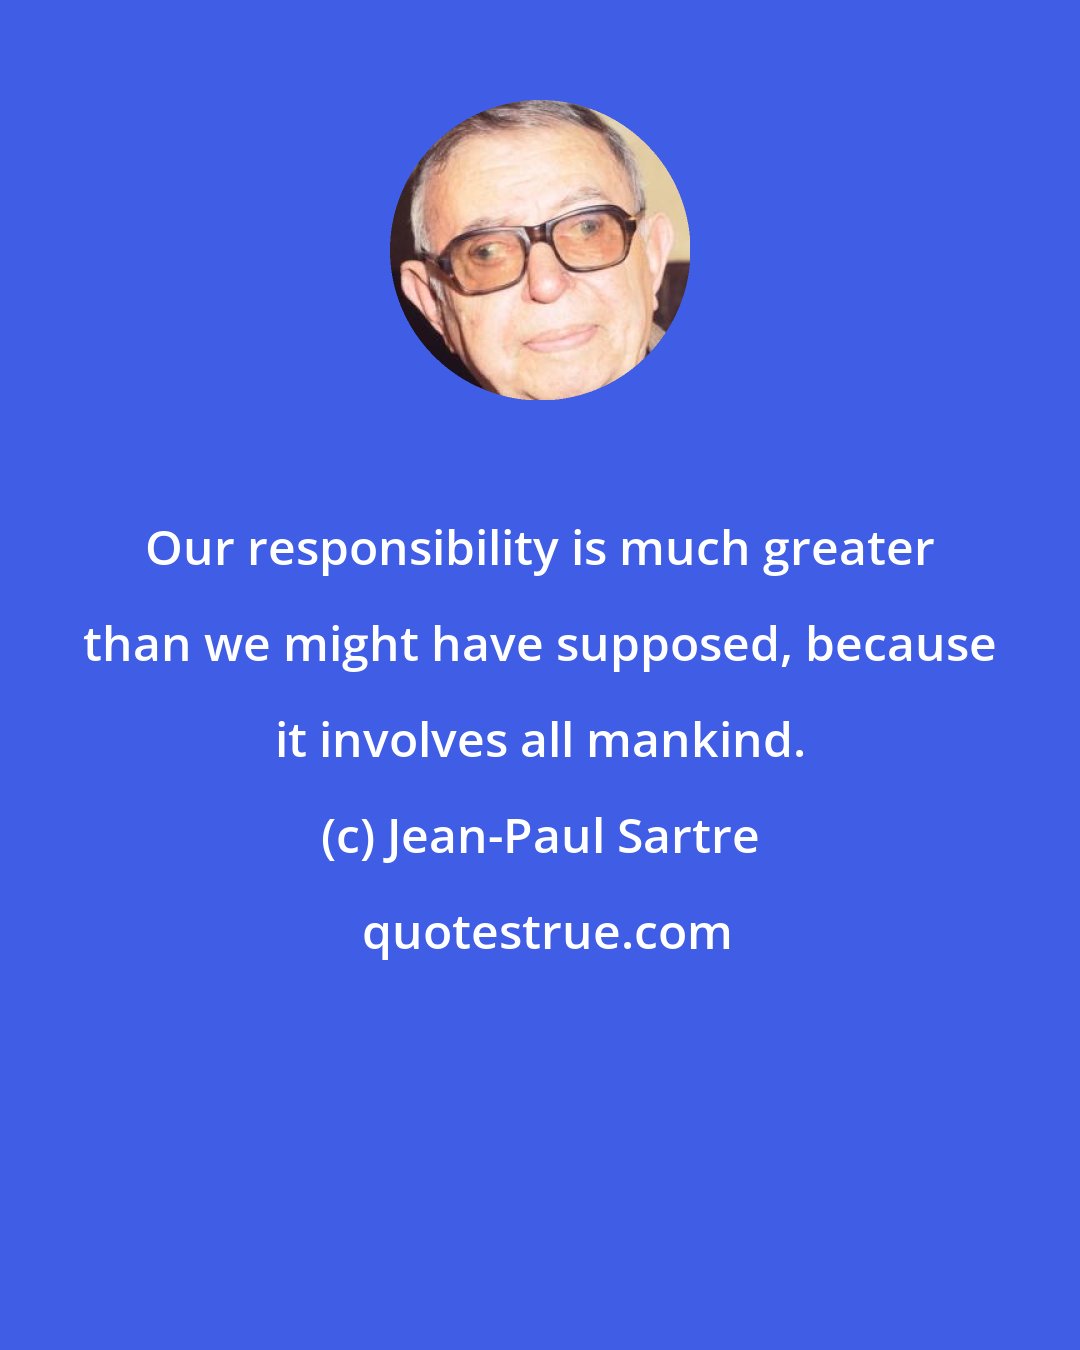 Jean-Paul Sartre: Our responsibility is much greater than we might have supposed, because it involves all mankind.